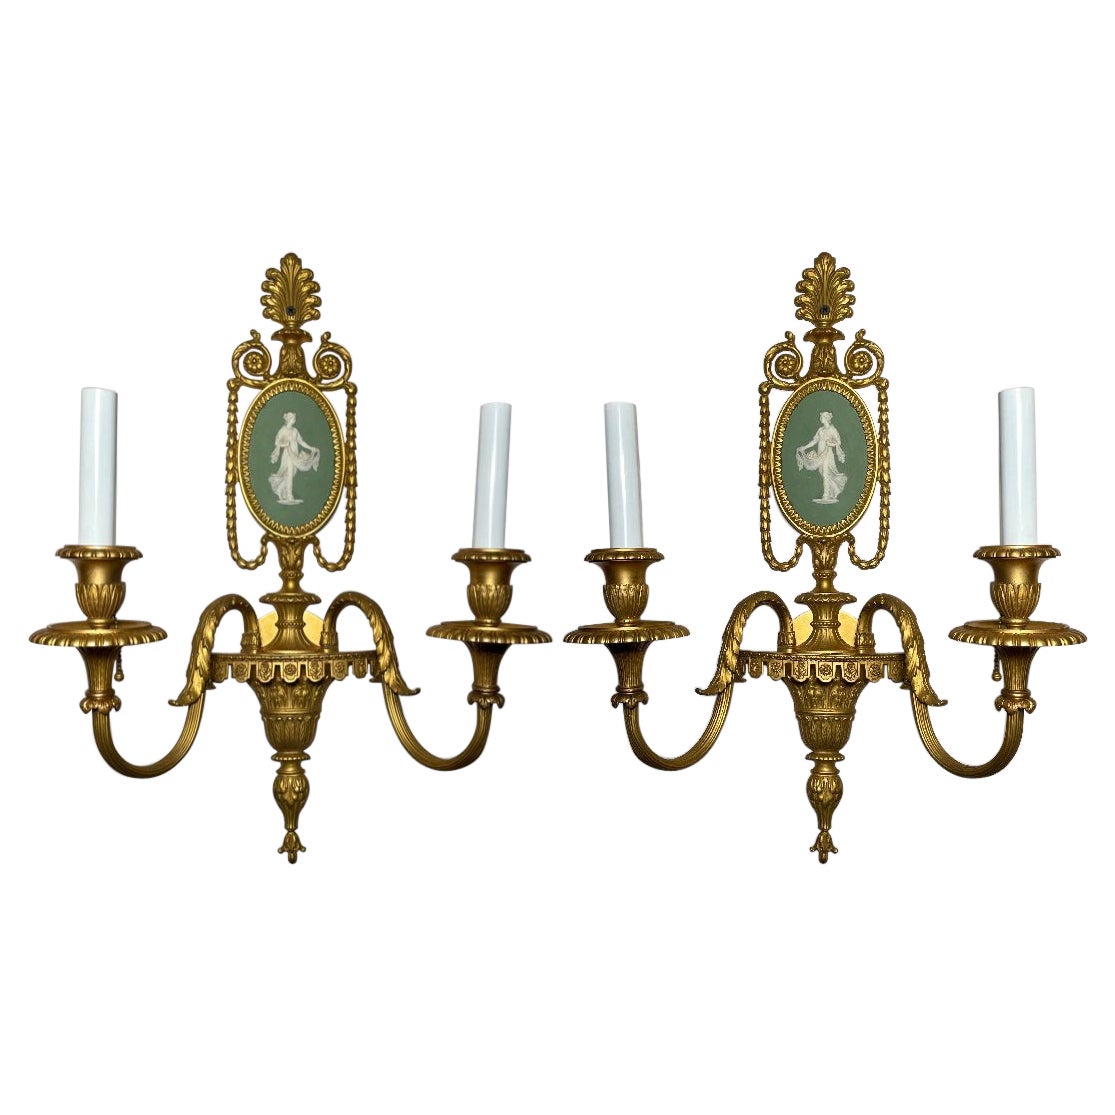 Pair Antique French Louis XVI Gold Bronze Sconces with Wedgwood Plaques, Ca 1880